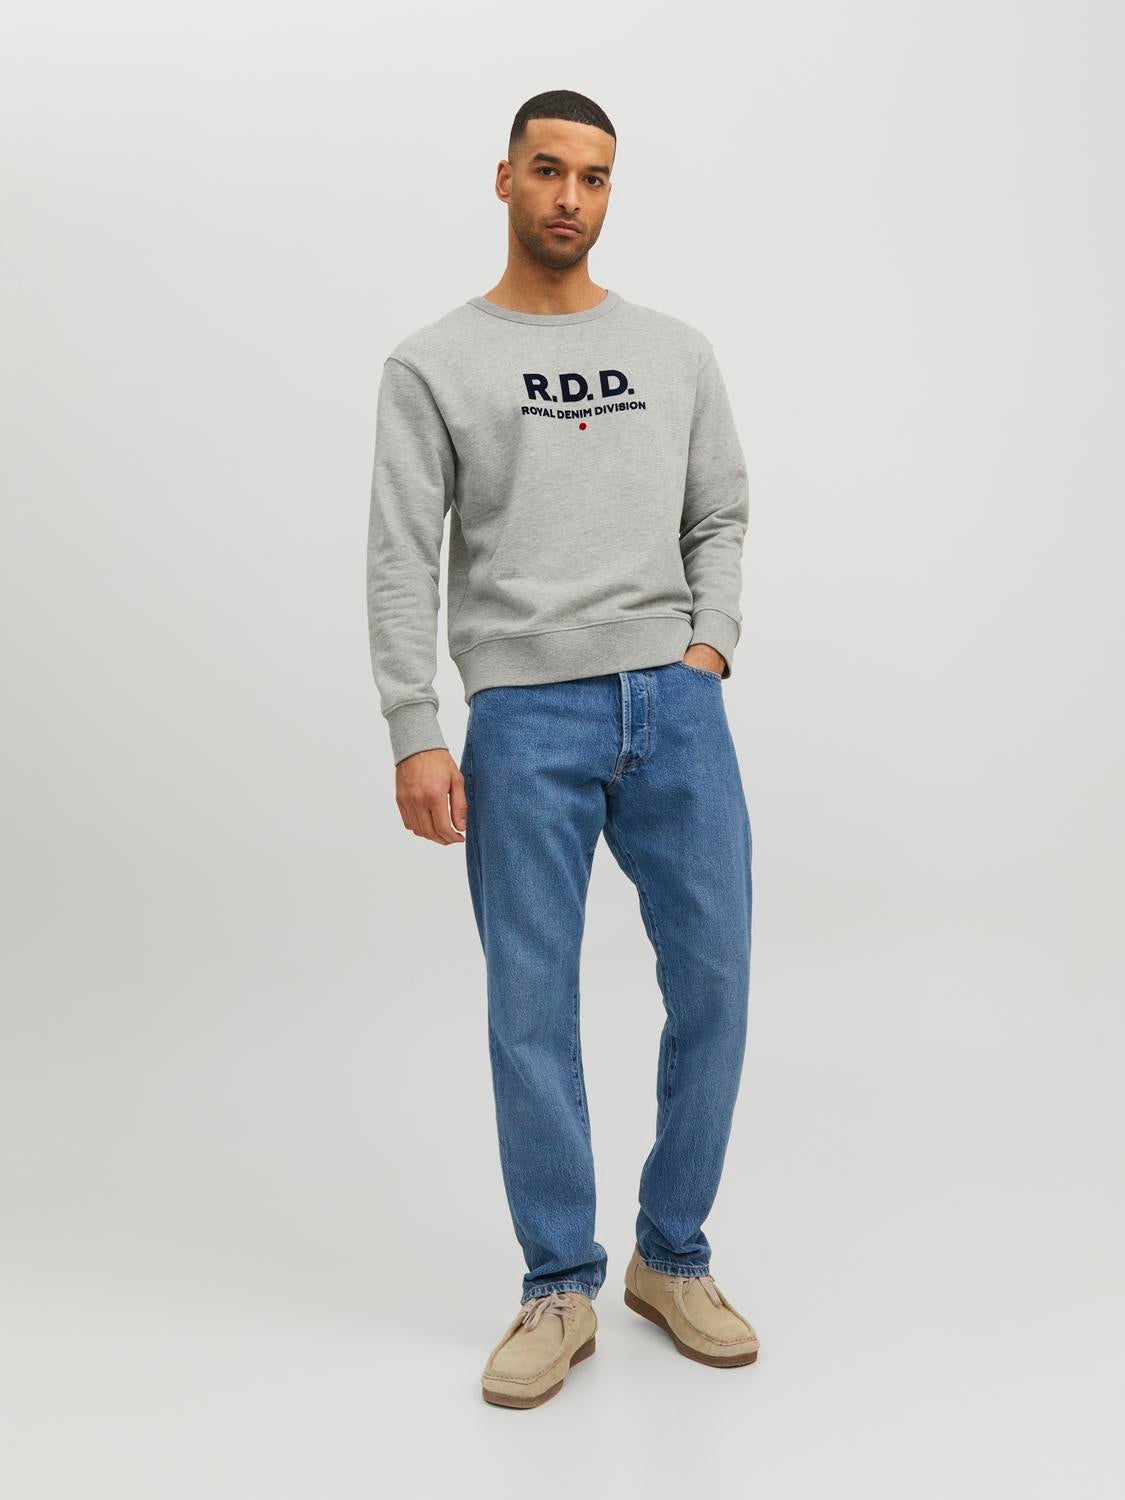 RDD Royal RI 311 Relaxed Fit Jeans